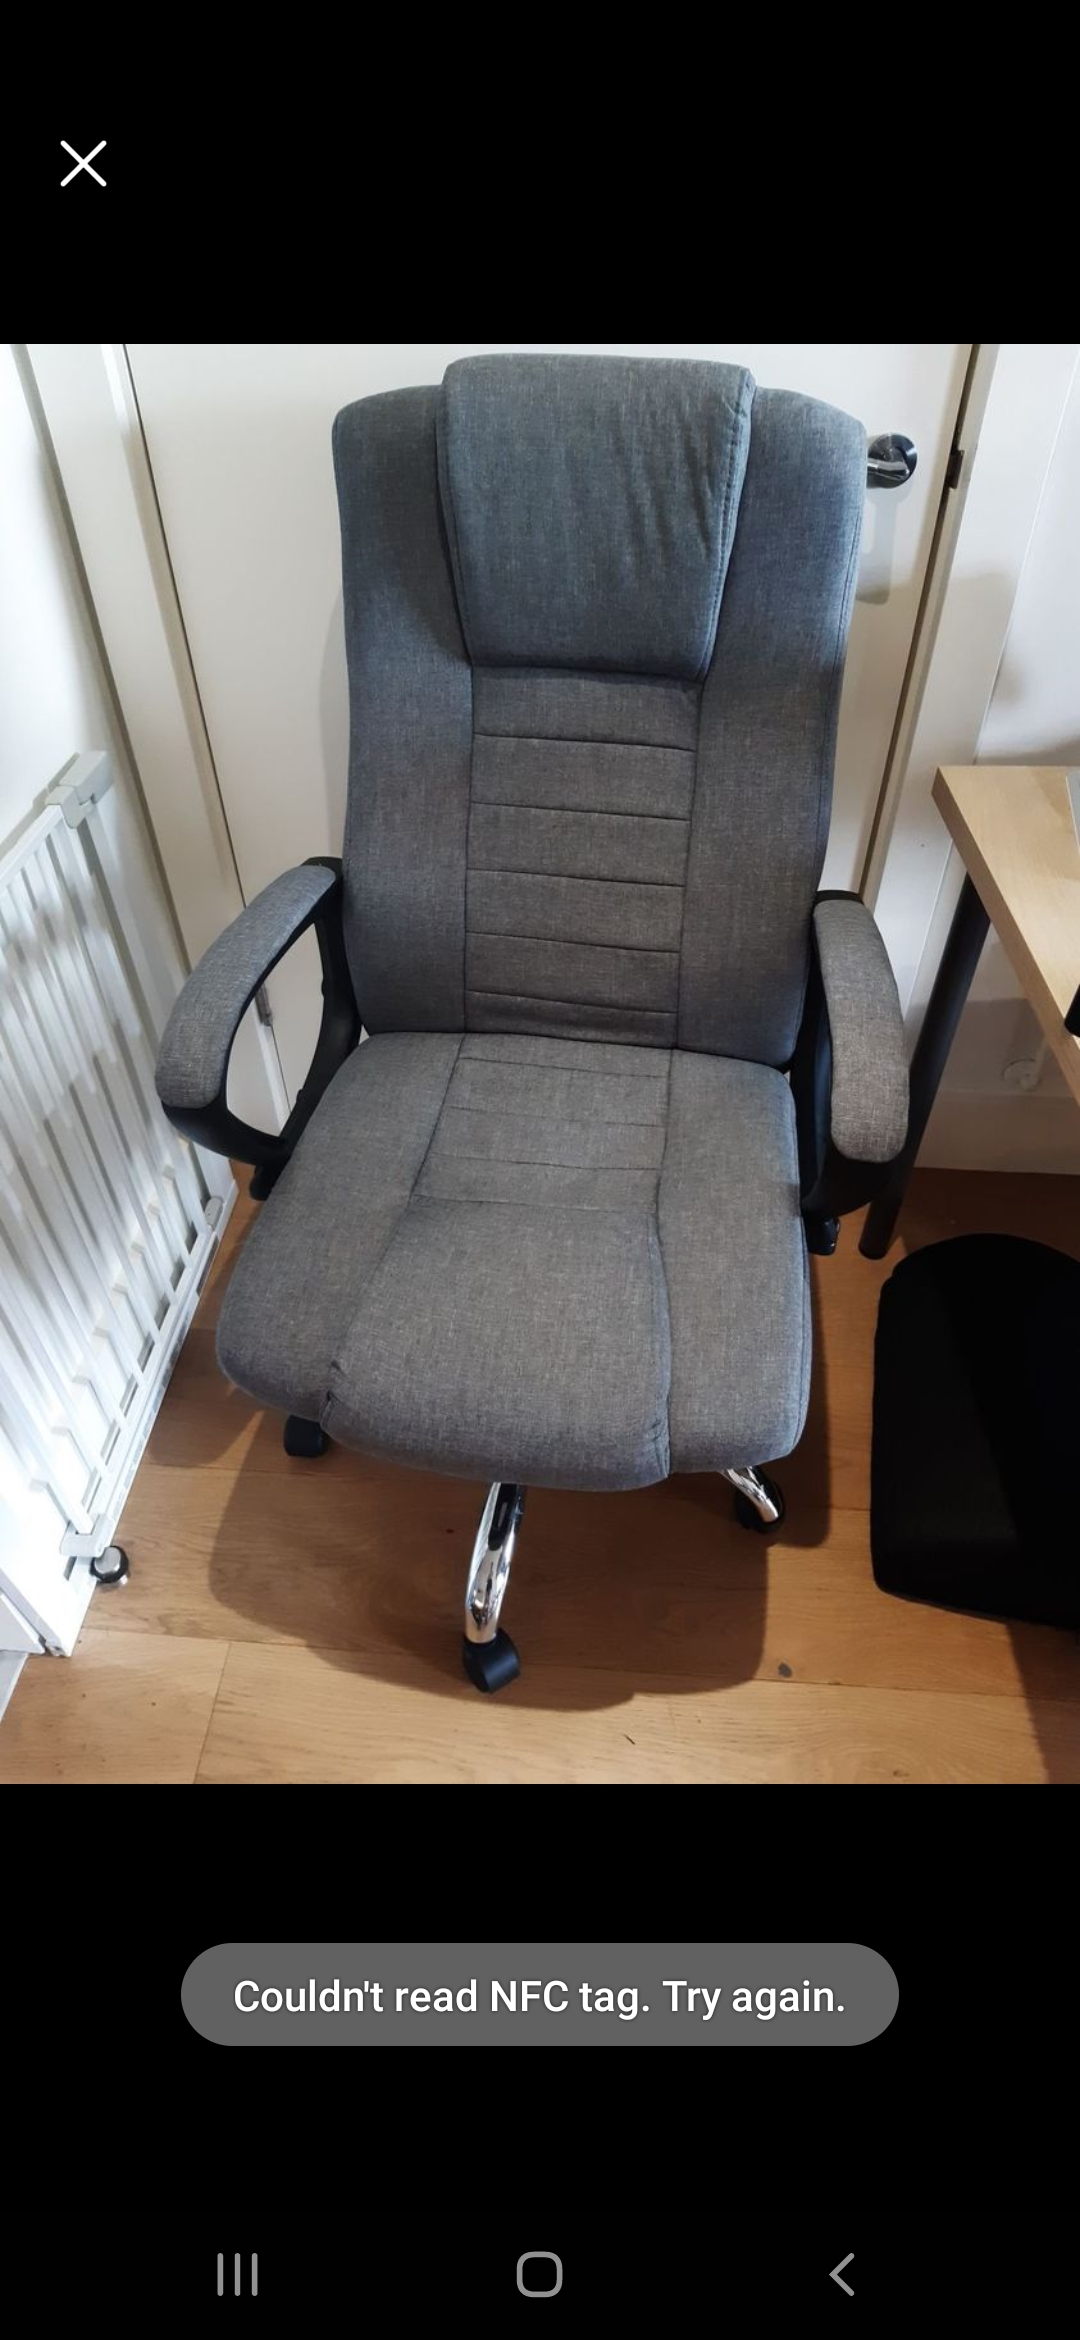 Picture shows gray ergonomic office chair.